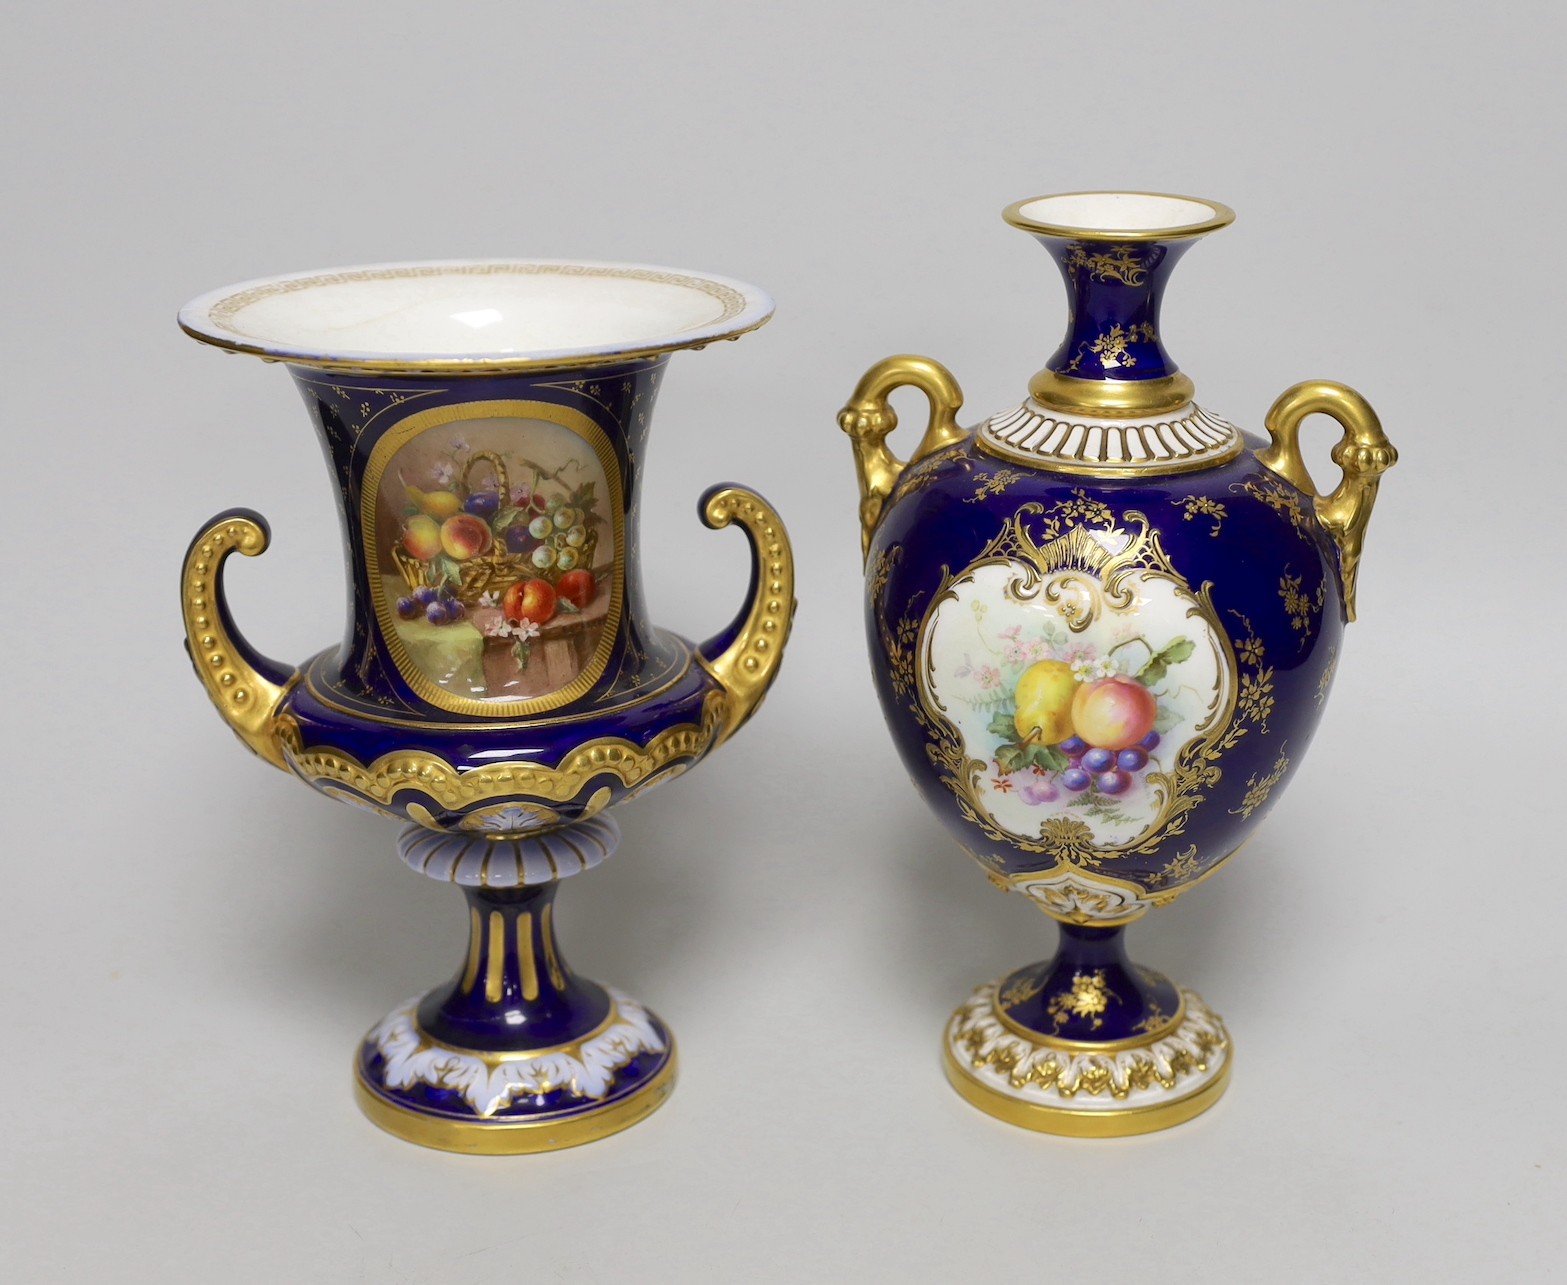 A Royal Worcester two handled vase with fruit on a blue ground by Hawkins, signed, marked LEADLESS GLAZE, date code 1901 together with a Royal Worcester vase, painted by Sebright, signed, date code 1913 (later a/f). Tall